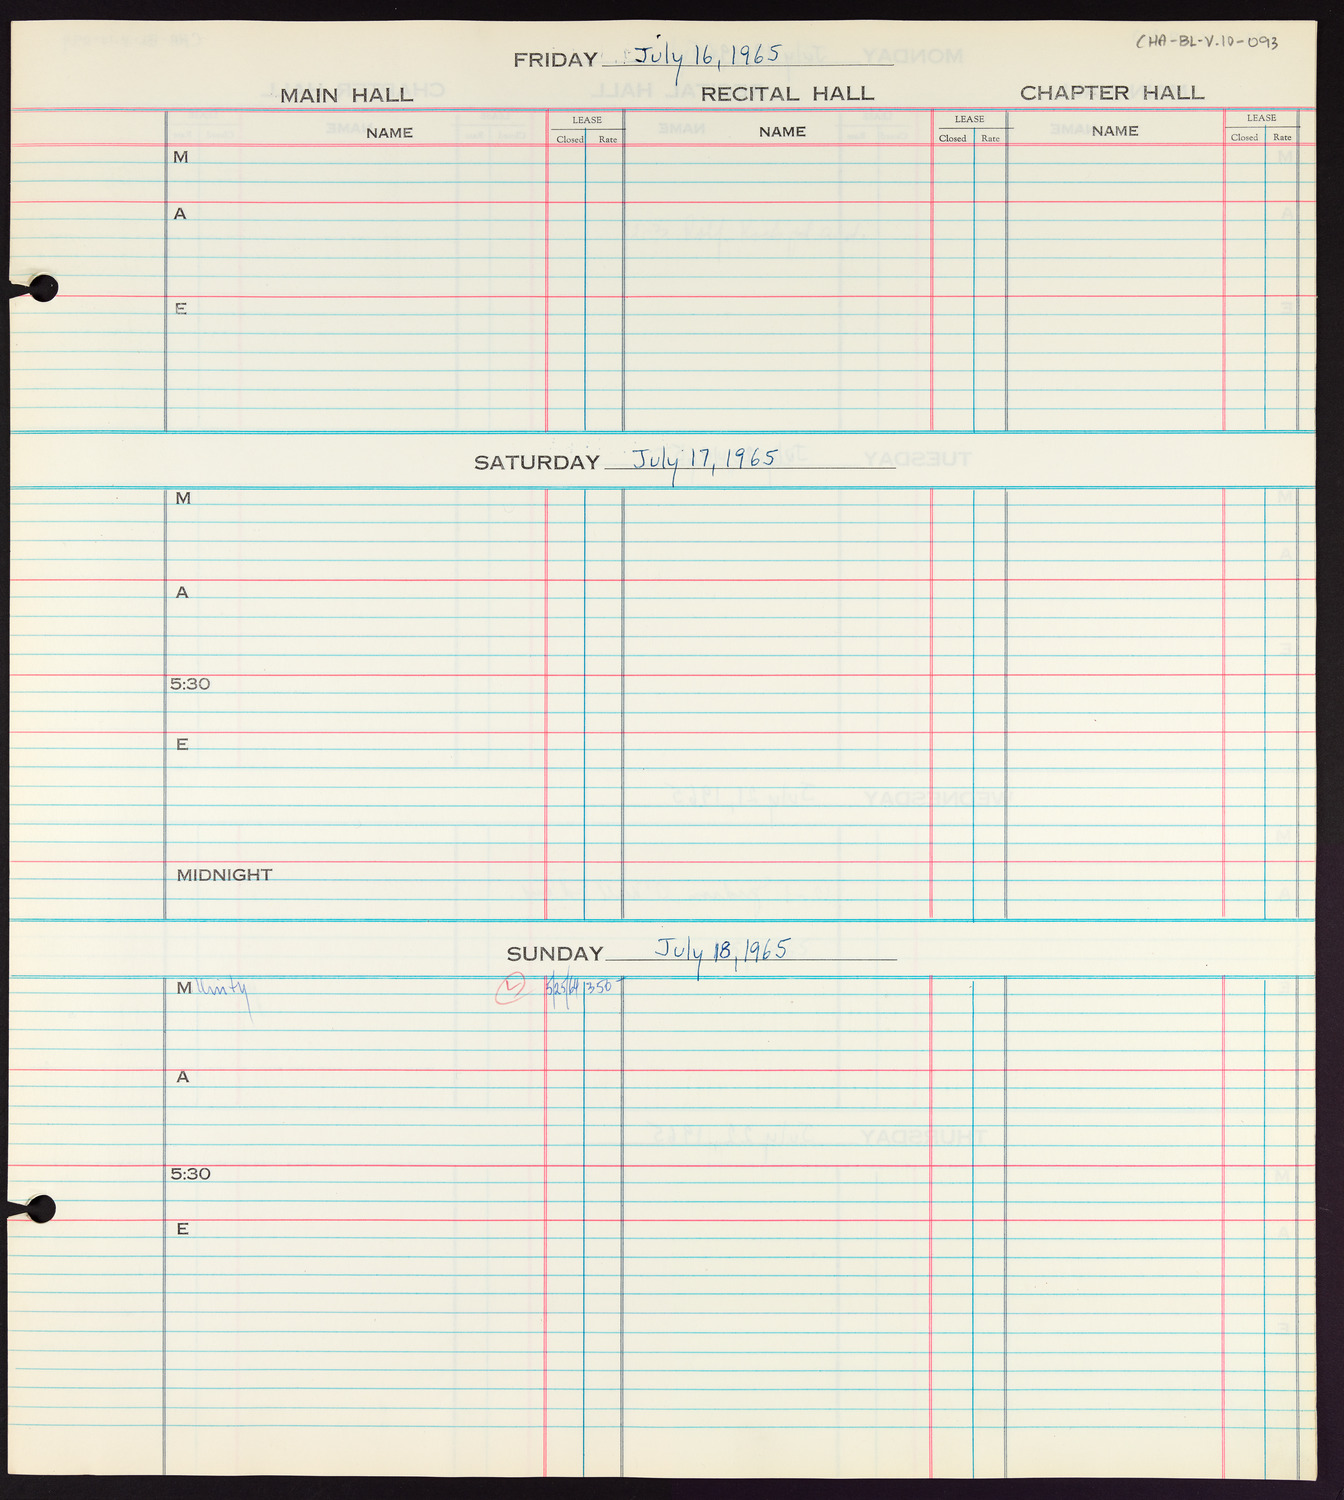 Carnegie Hall Booking Ledger, volume 10, page 93